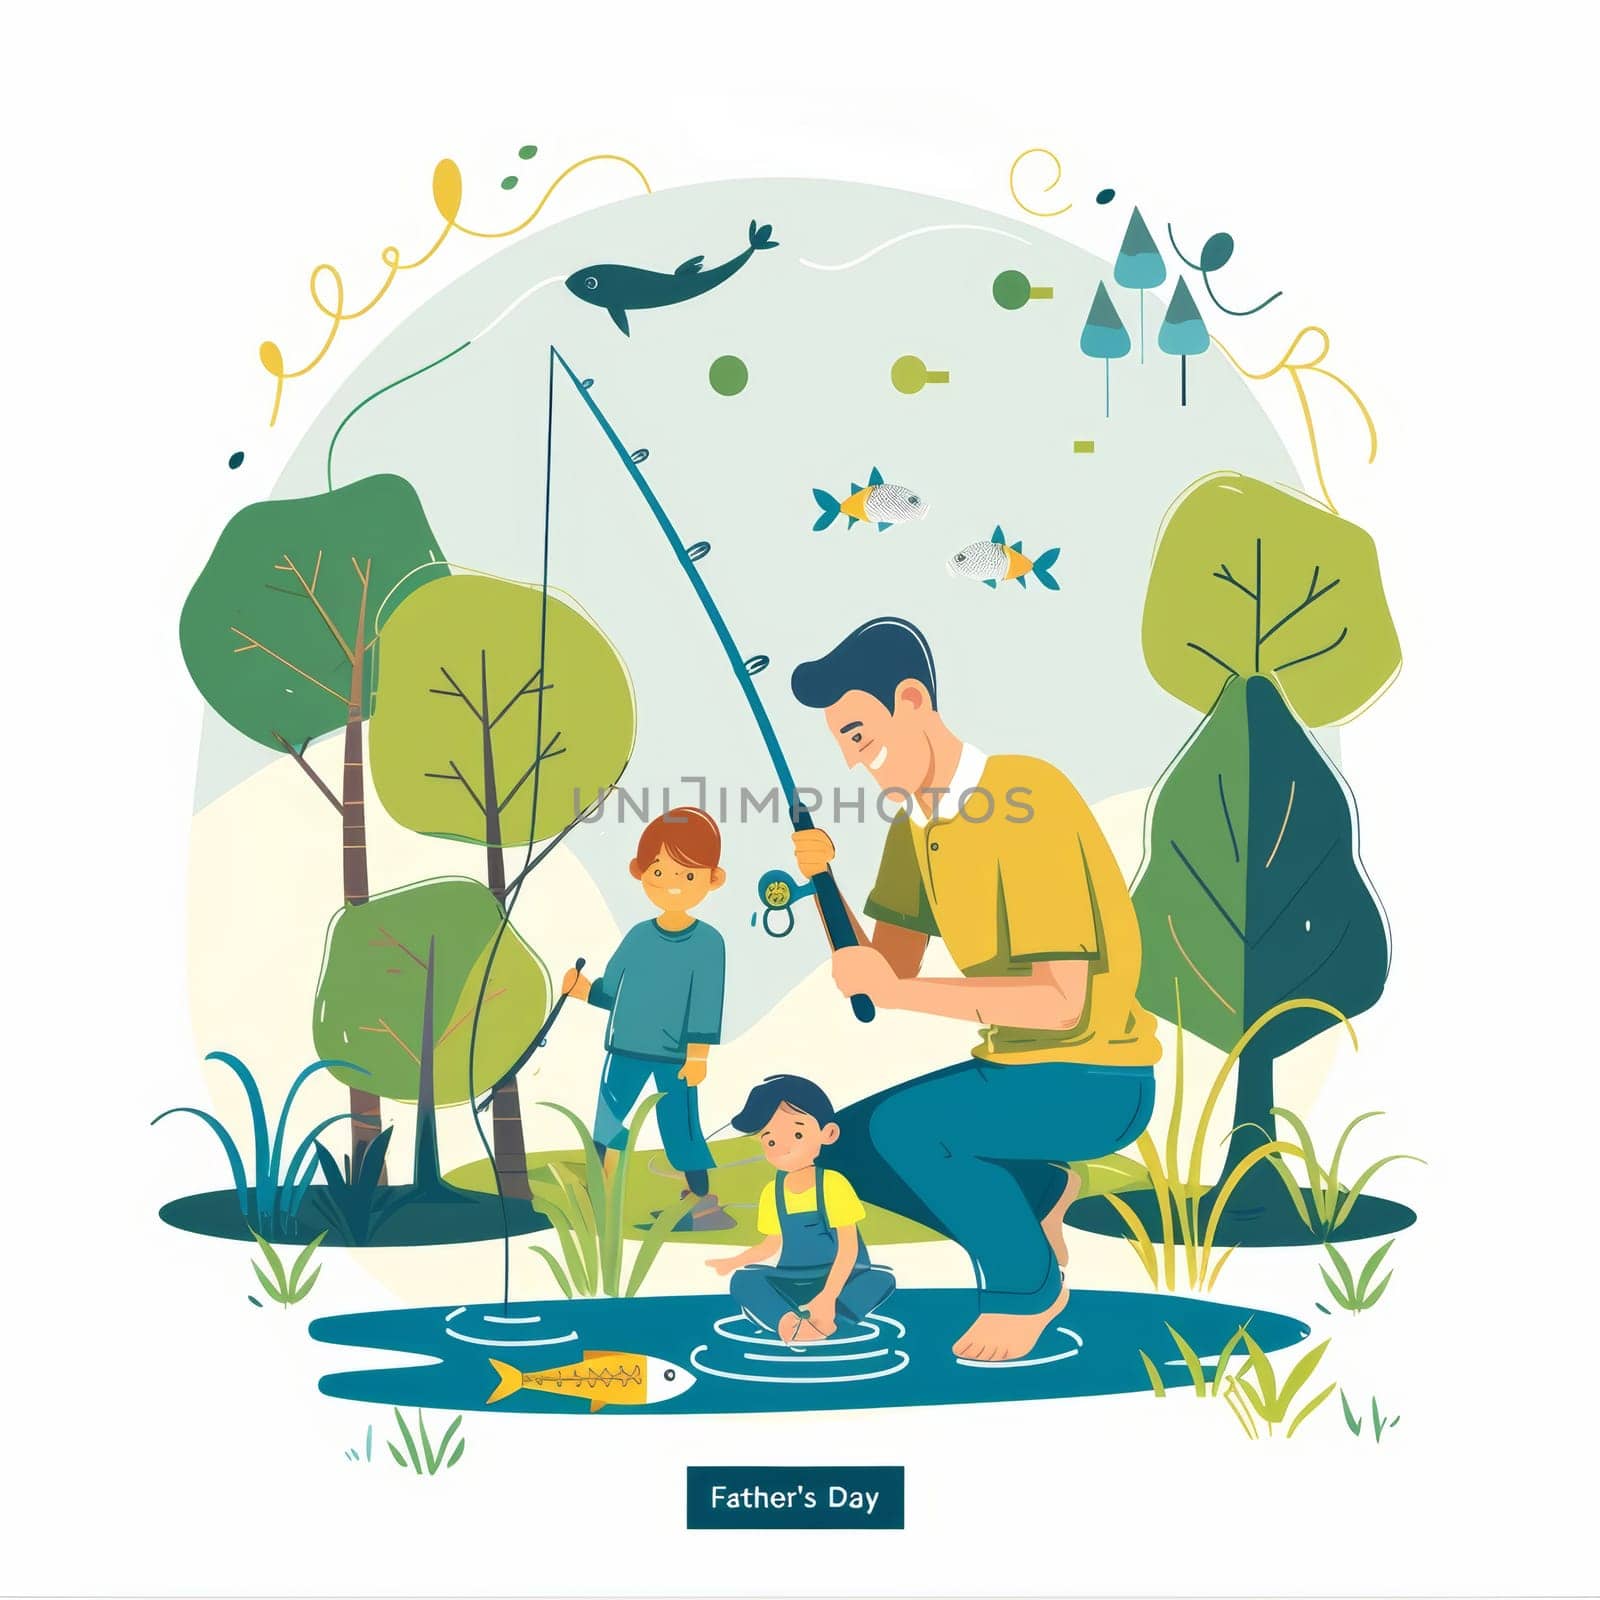 A cheerful father and his children are depicted fishing together amidst a vibrant, illustrated landscape, celebrating Fathers Day with joy. by sfinks